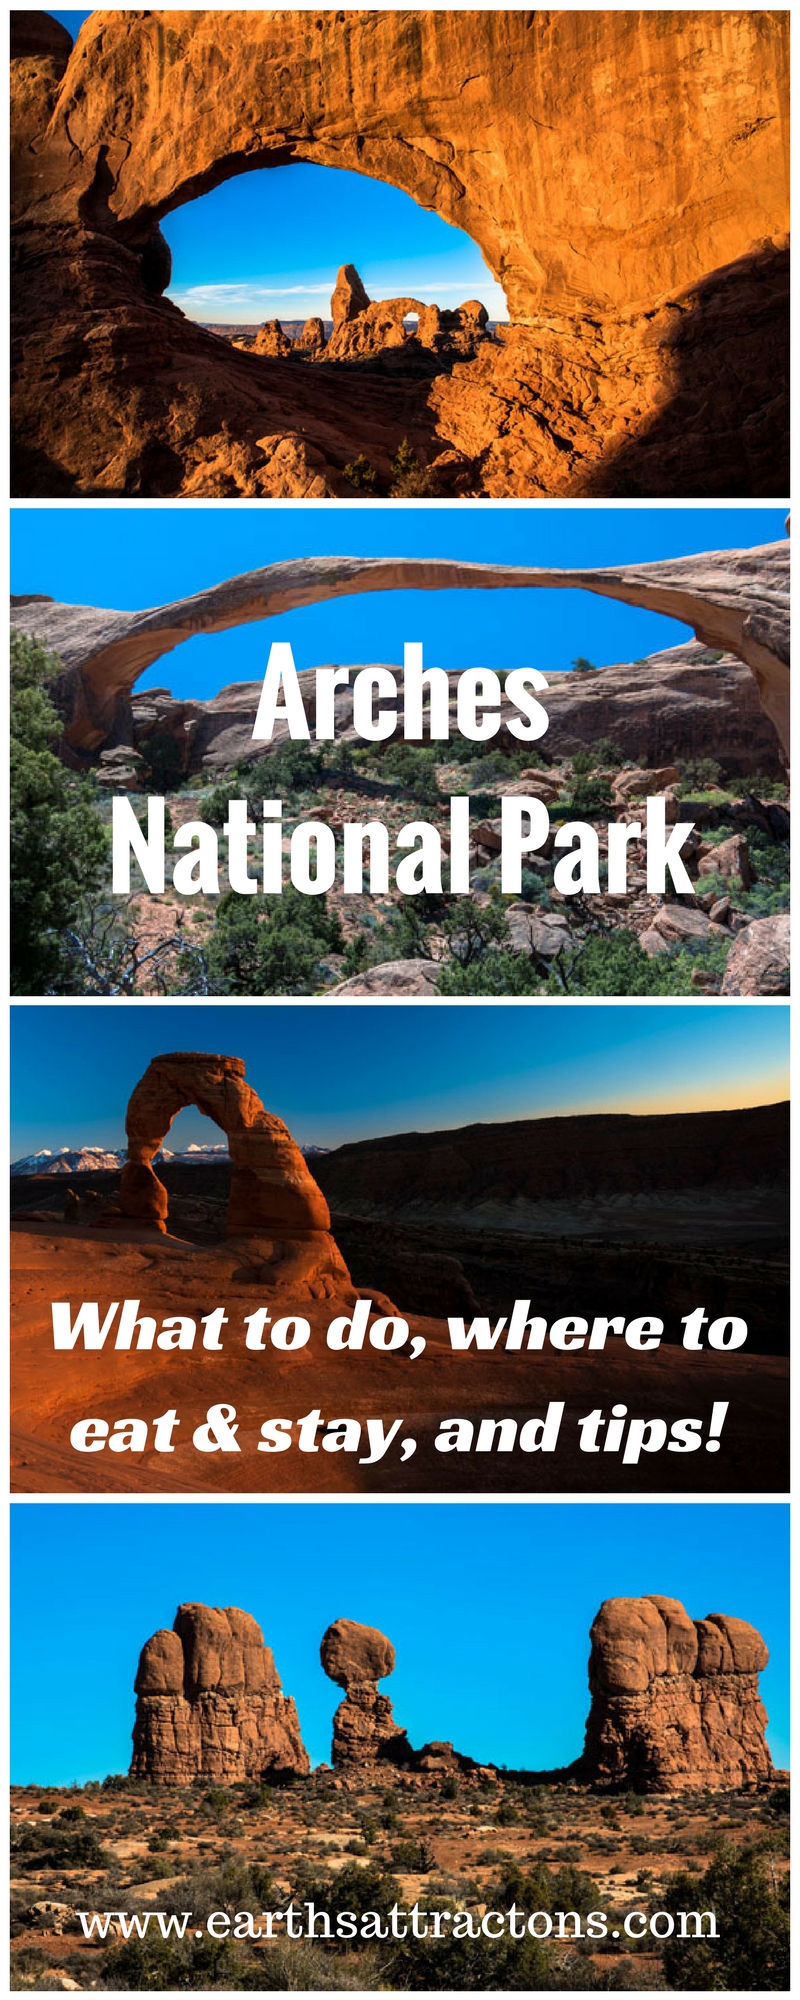 A complete travel guide to Arches National Park (USA) with all you need to know: what to see, where to stay, where to eat, and tips